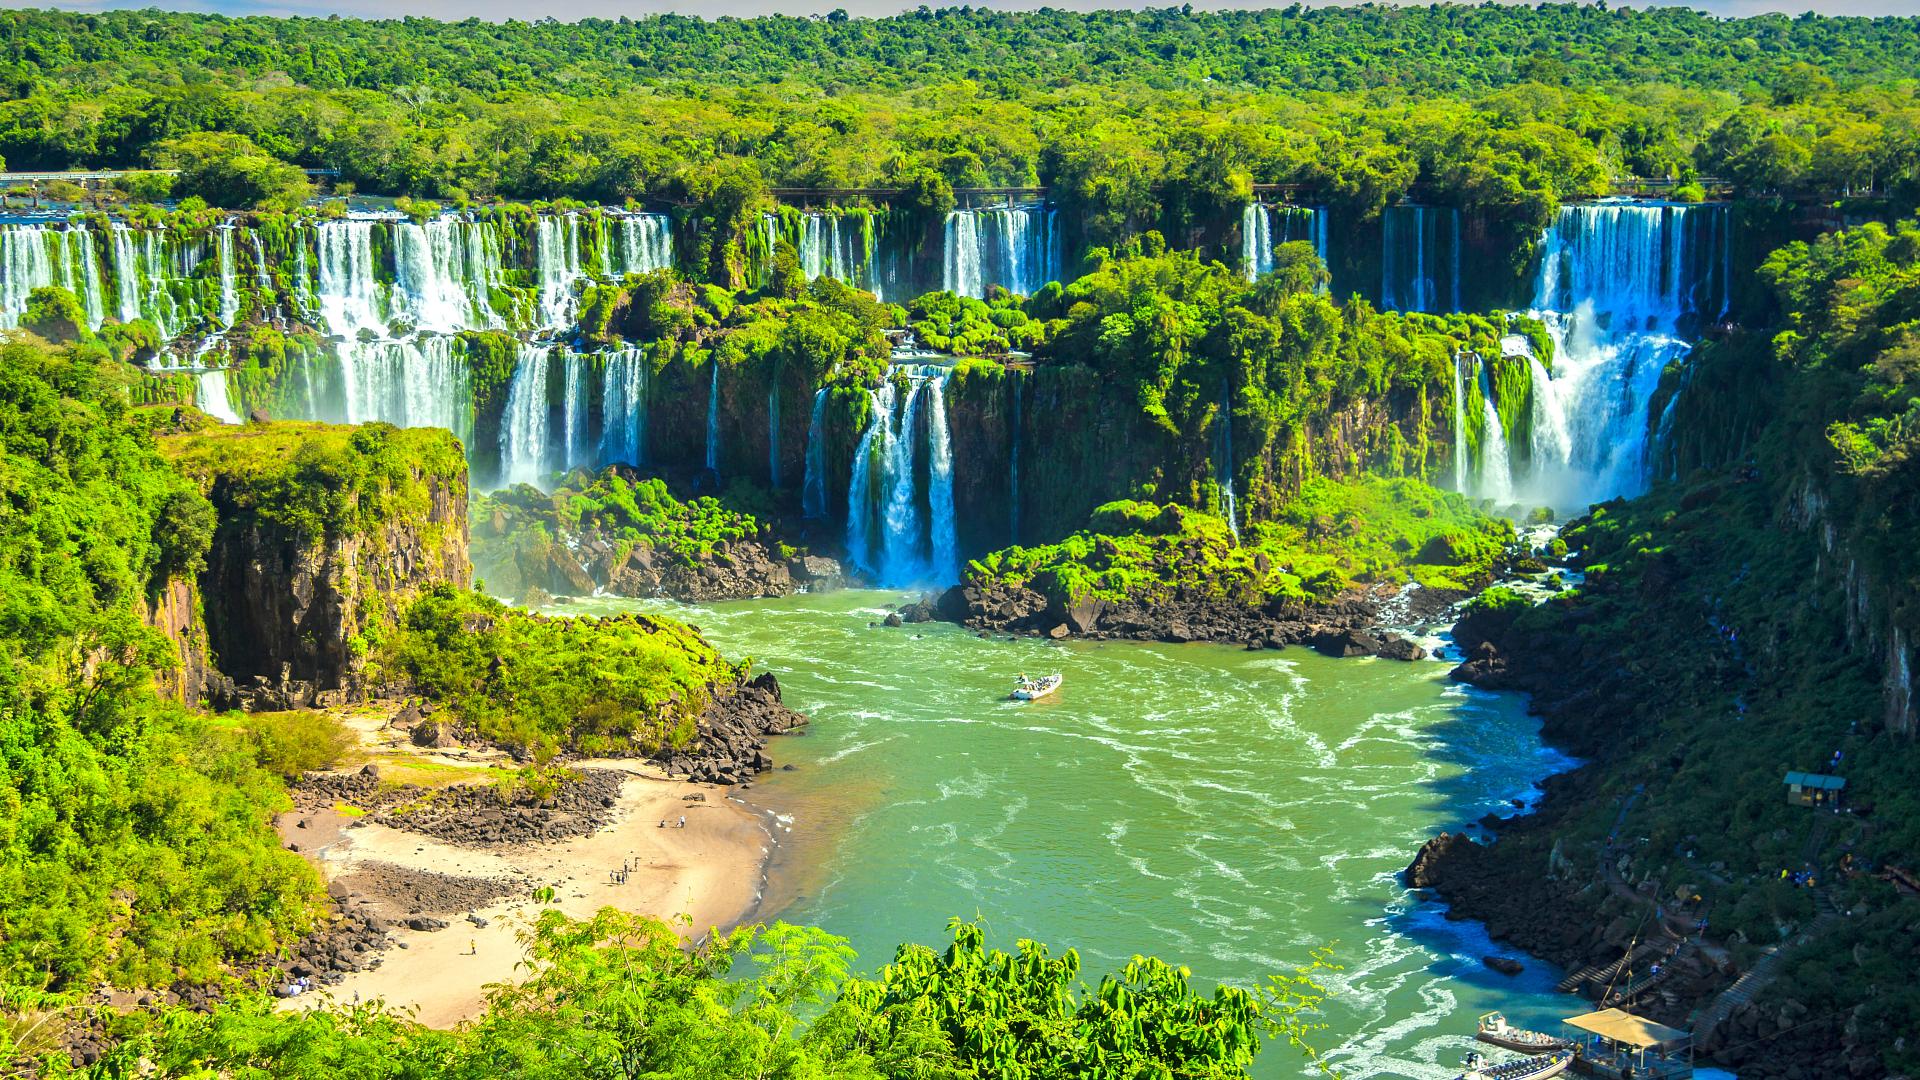 Make the most of your stay in Puerto Iguazú!